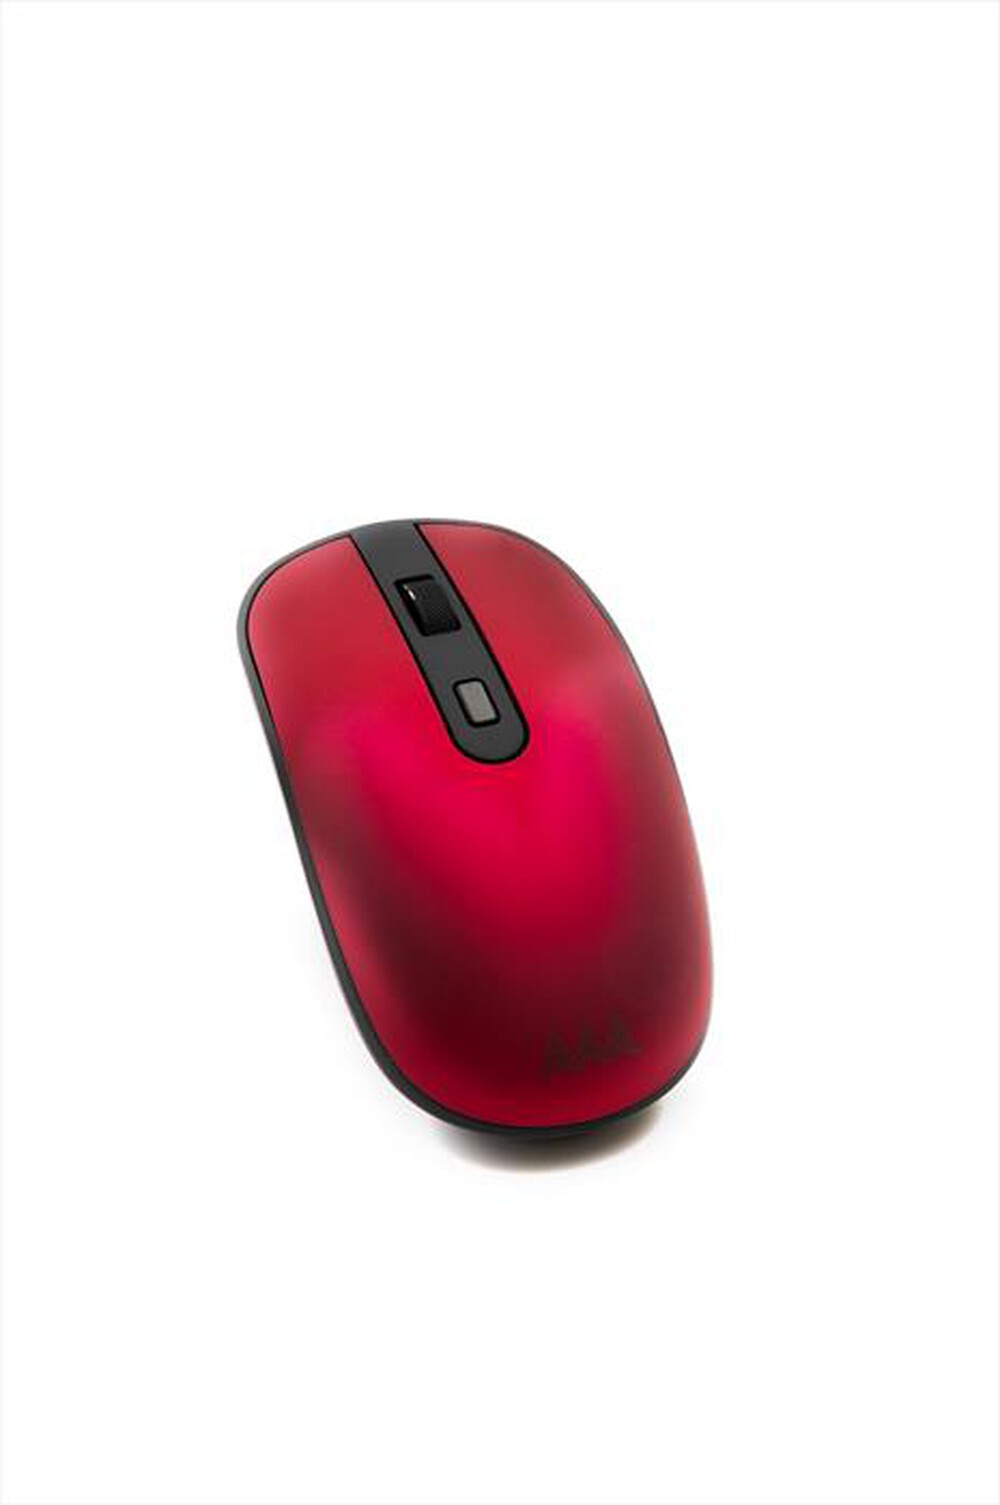 "AAAMAZE - MOUSE WRLS DONGLE - Rosso"